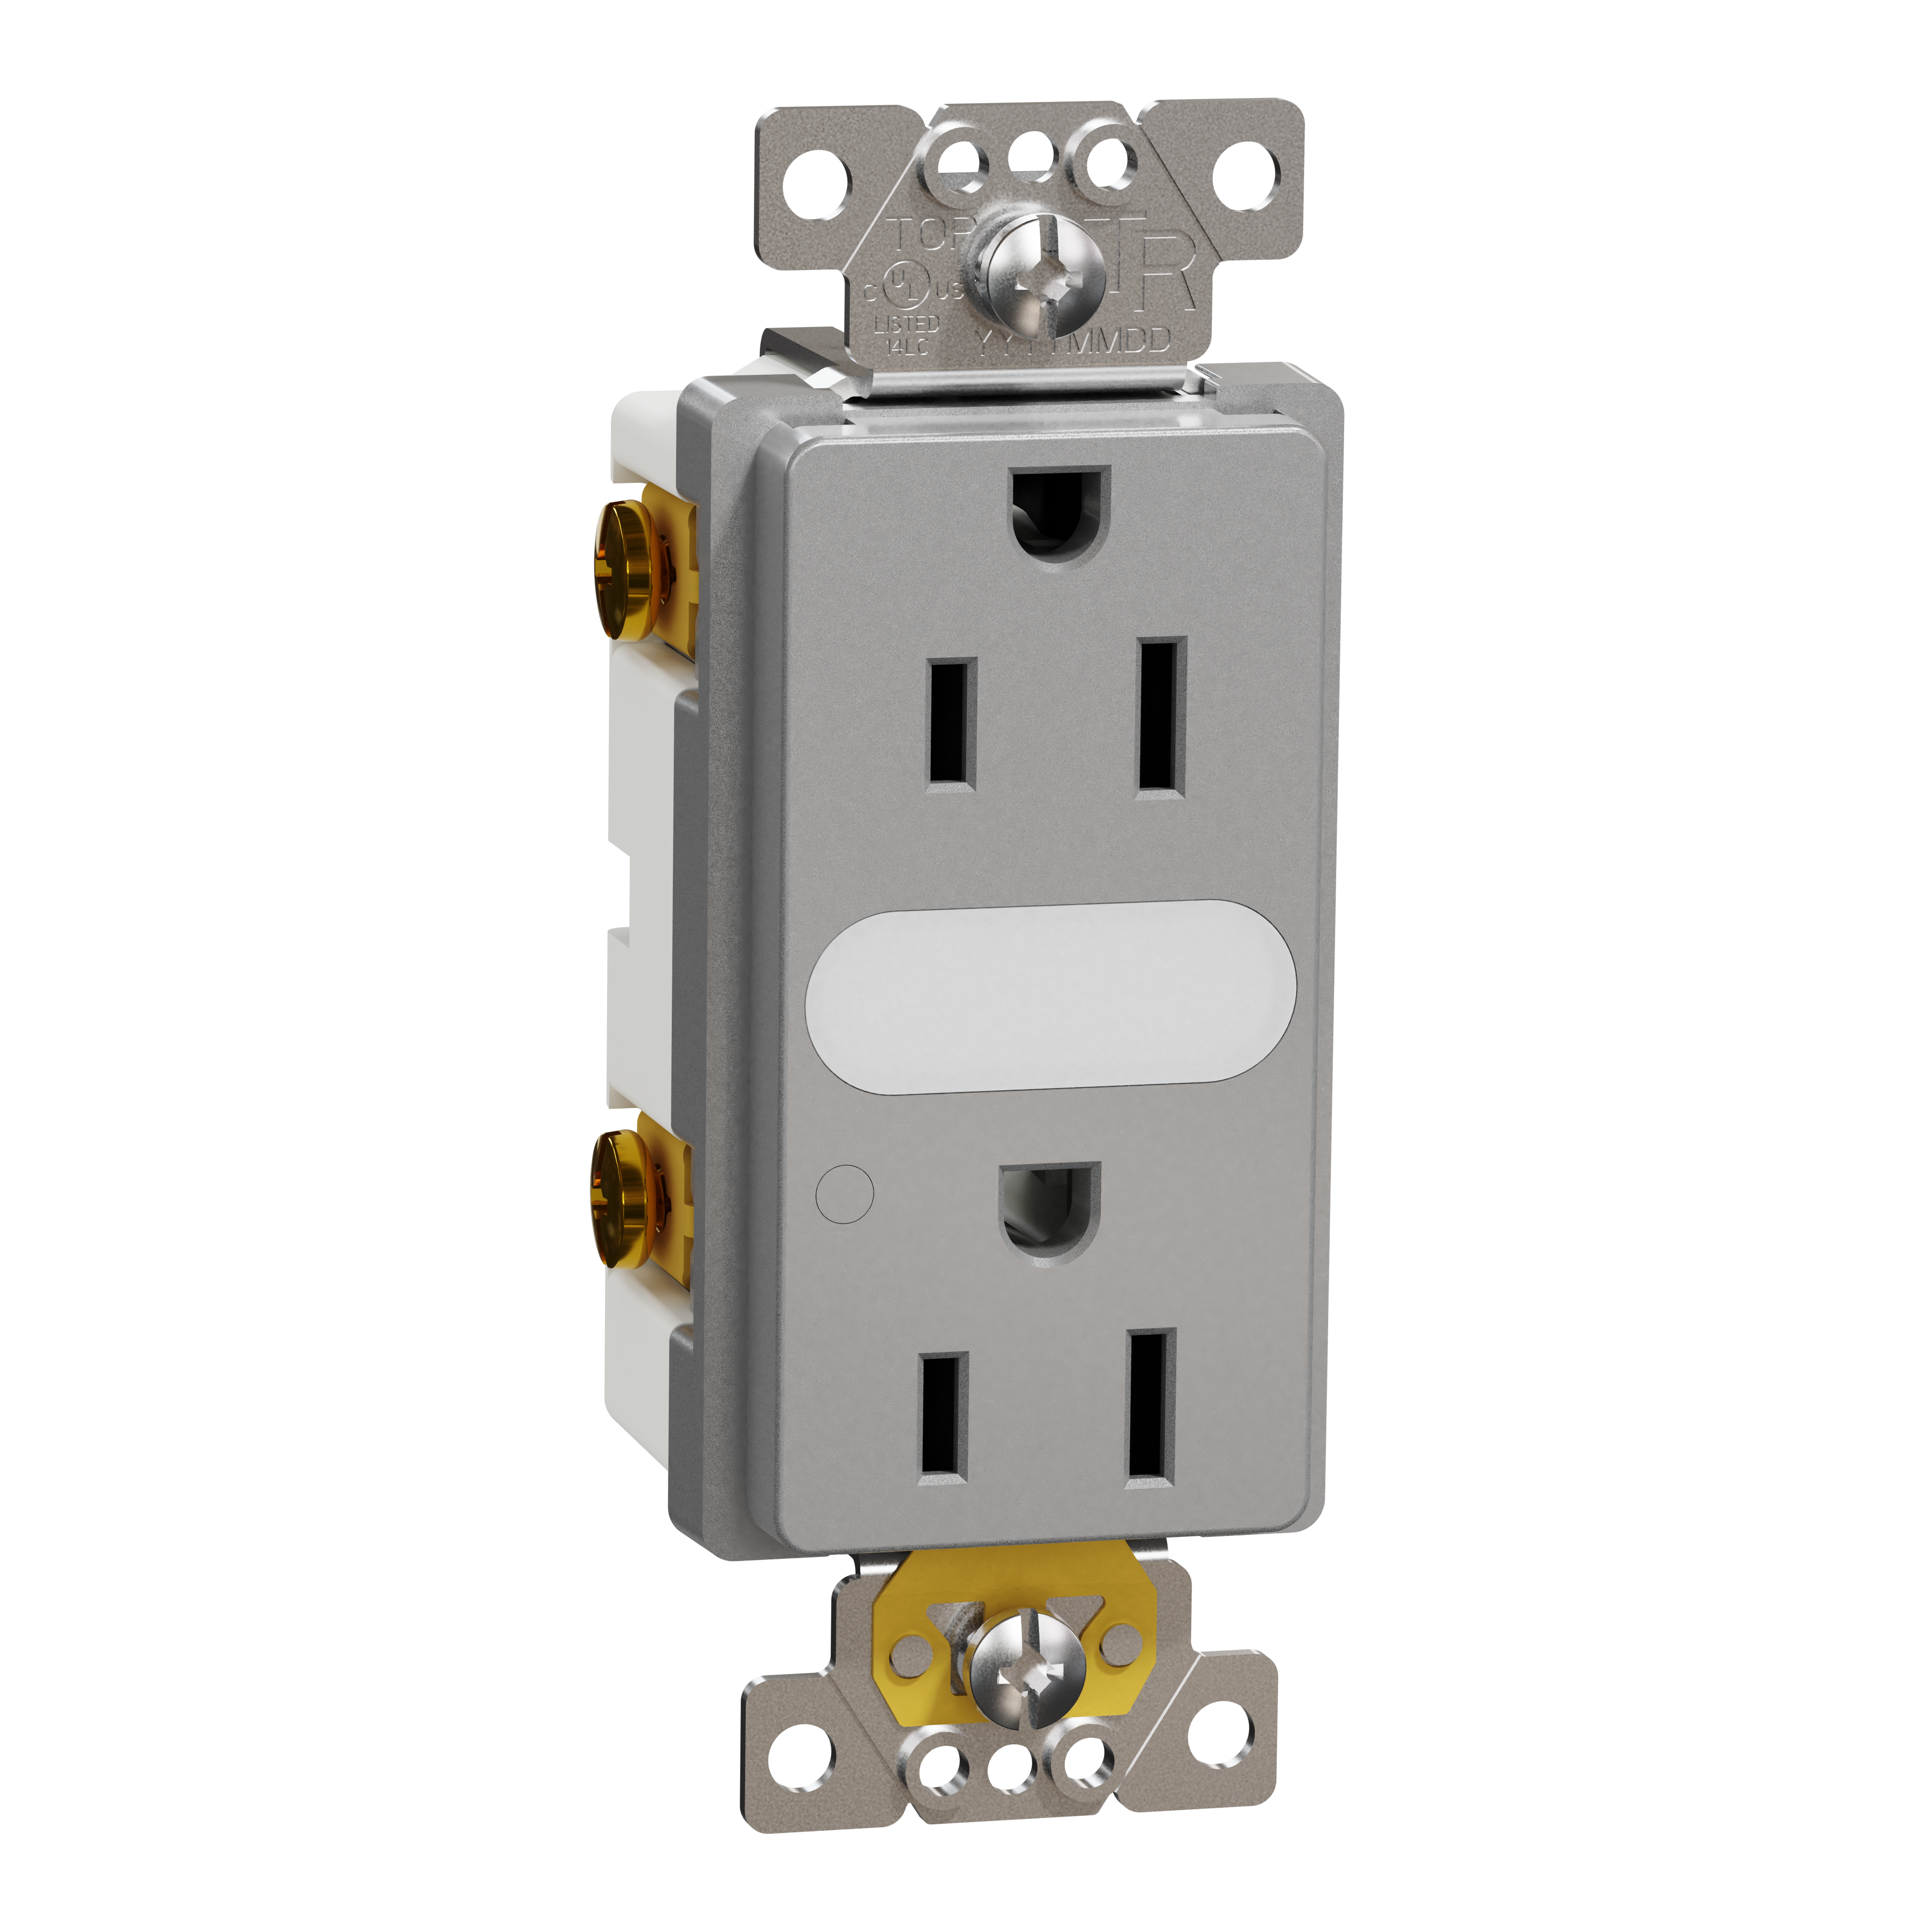 Socket-outlet, X Series, 15A, decorator, tamper resistant, lighted, residential, gray, matte finish